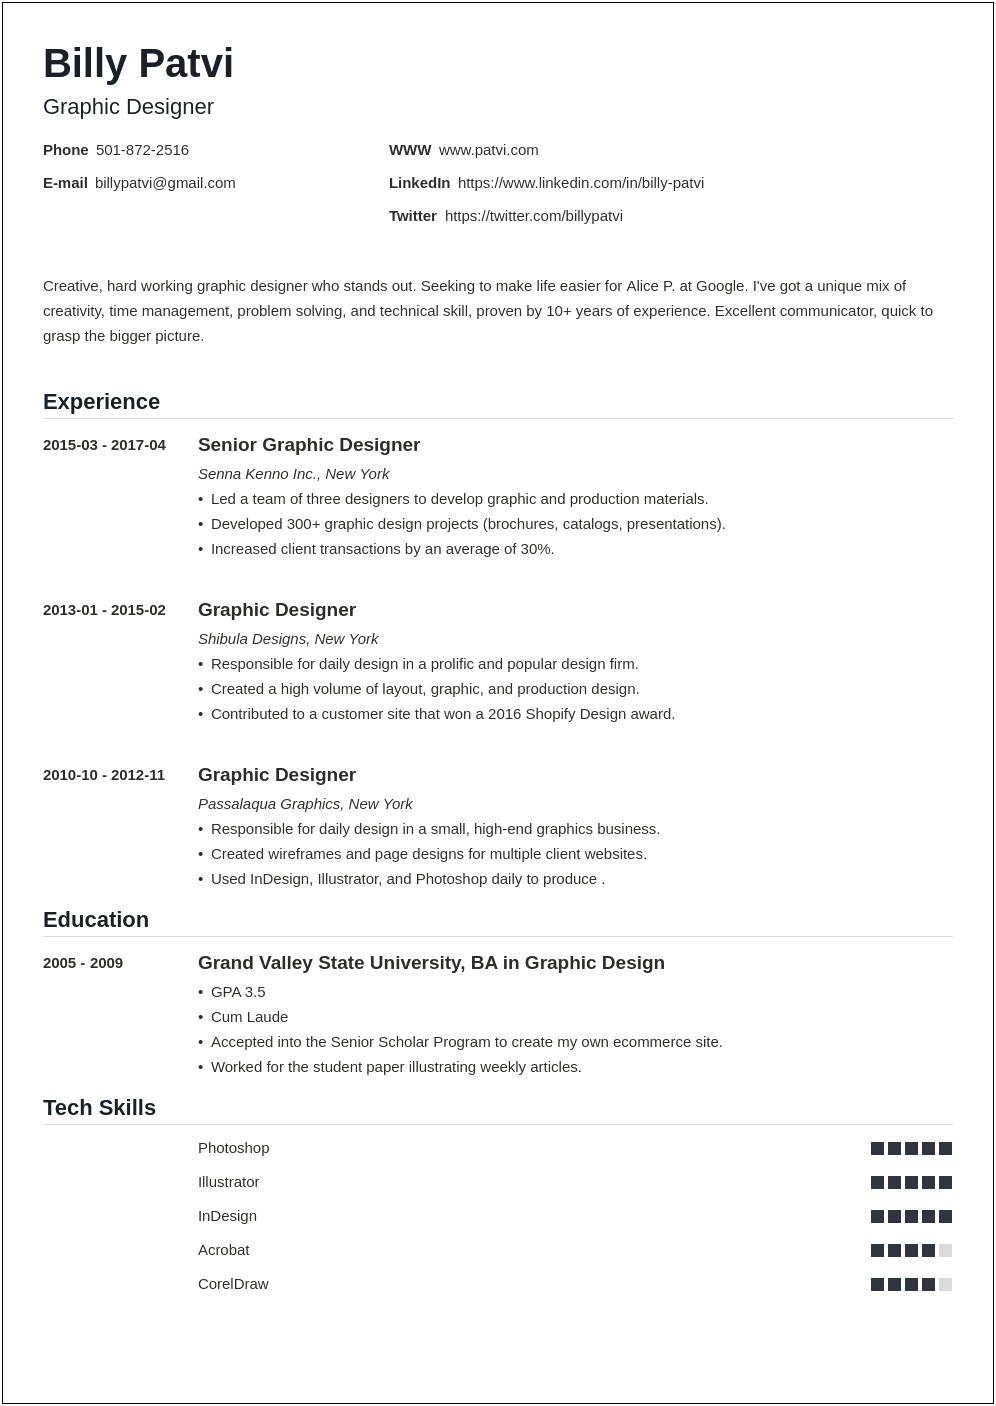 Graphic Design Skills To Include On Resume